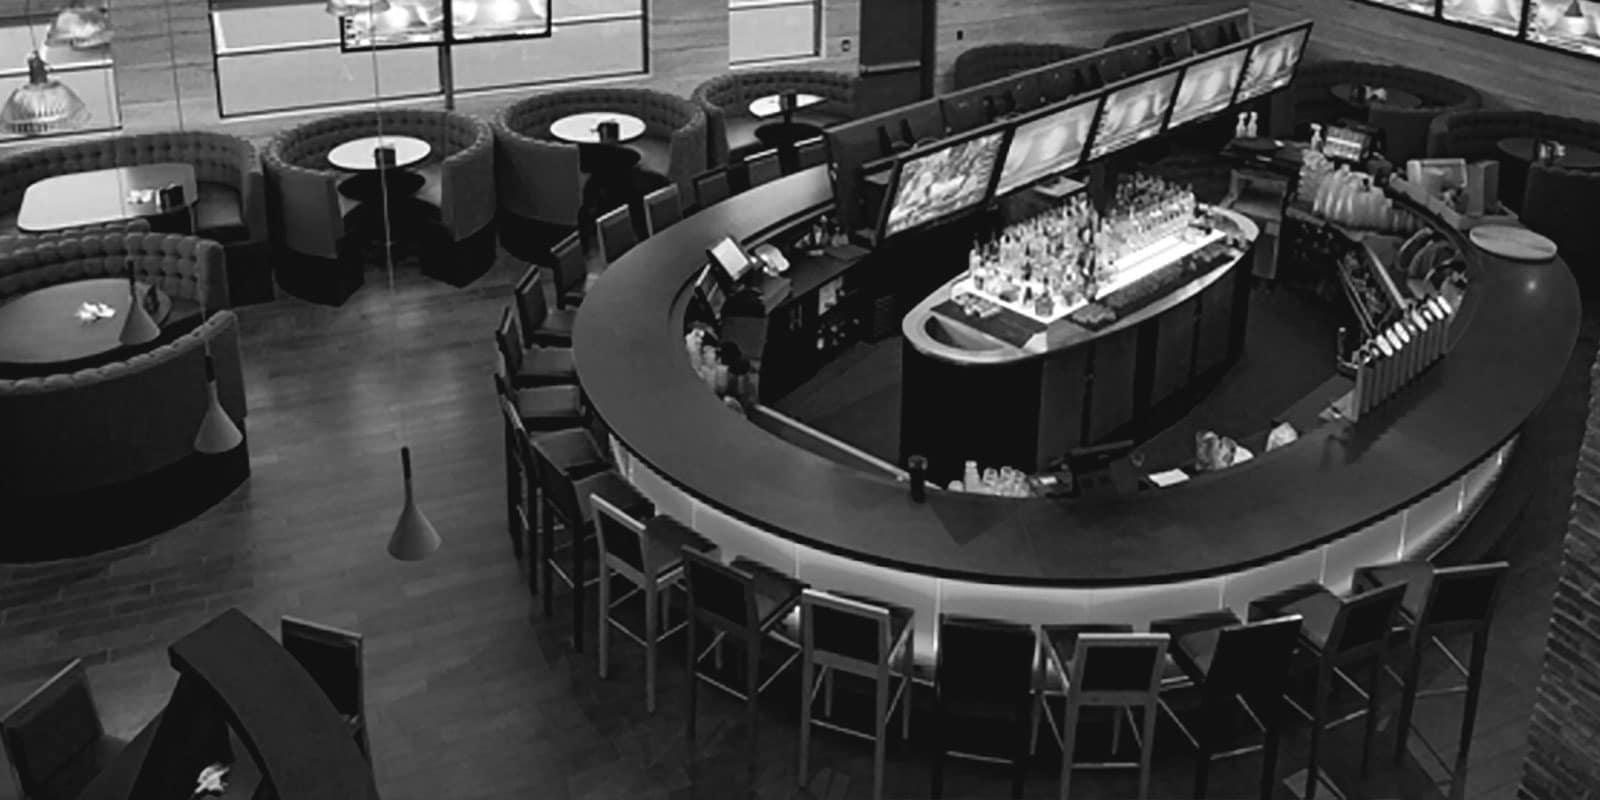 Calgary Deerfoot Meadows Shark Club Sports Bar and Grill Interior View